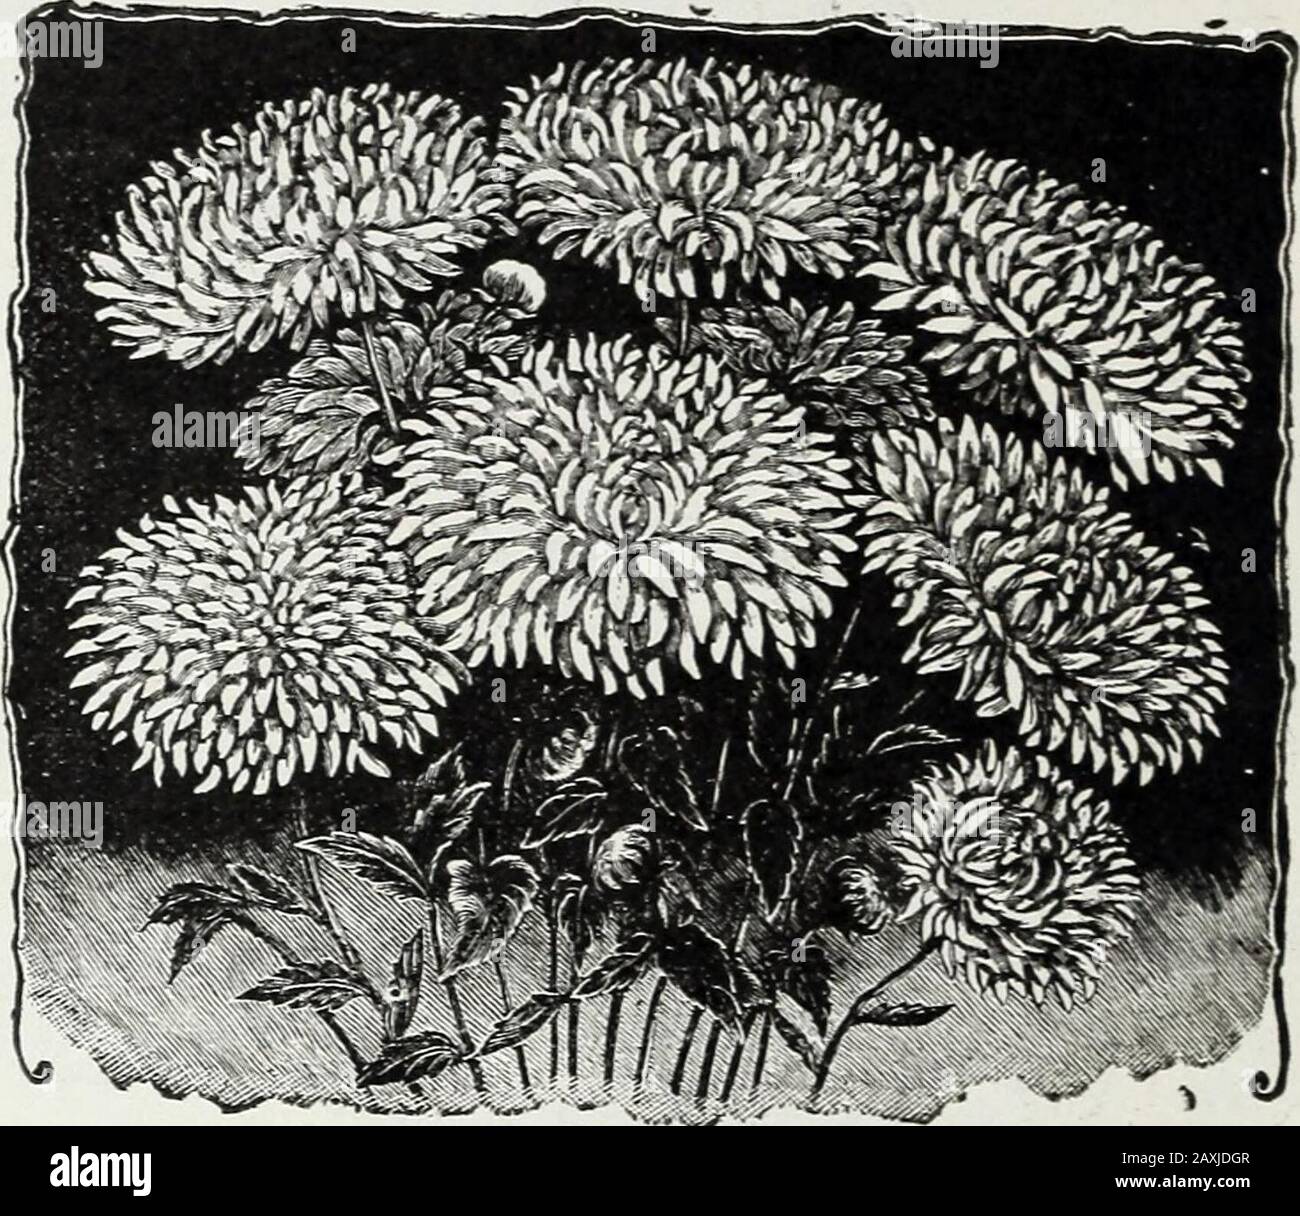 Flower seeds . New Comet Aster. NEW COMET ASTER. The plants of this new variety are perfectly true in character,growing twelve to fifteen inches high and covered with large,double flowers, as shown in the illustration. The flowers measurefrom by2 to ilA inches in diameter, resembling in shape and artis-tically curved and twisted petals, the finest Chinese Chrysanthe-mums. Mixed colors. Pkt., 50 seeds, 5 cts. NEW WHITE COMET ASTER. Pkt.- 50 seeds, 6 cts. NEW QUEEN ASTER. Very dwarf, bushy plants, growing from ten to twelve inches high,excellent for pot culture as well as for bedding. The flower Stock Photo